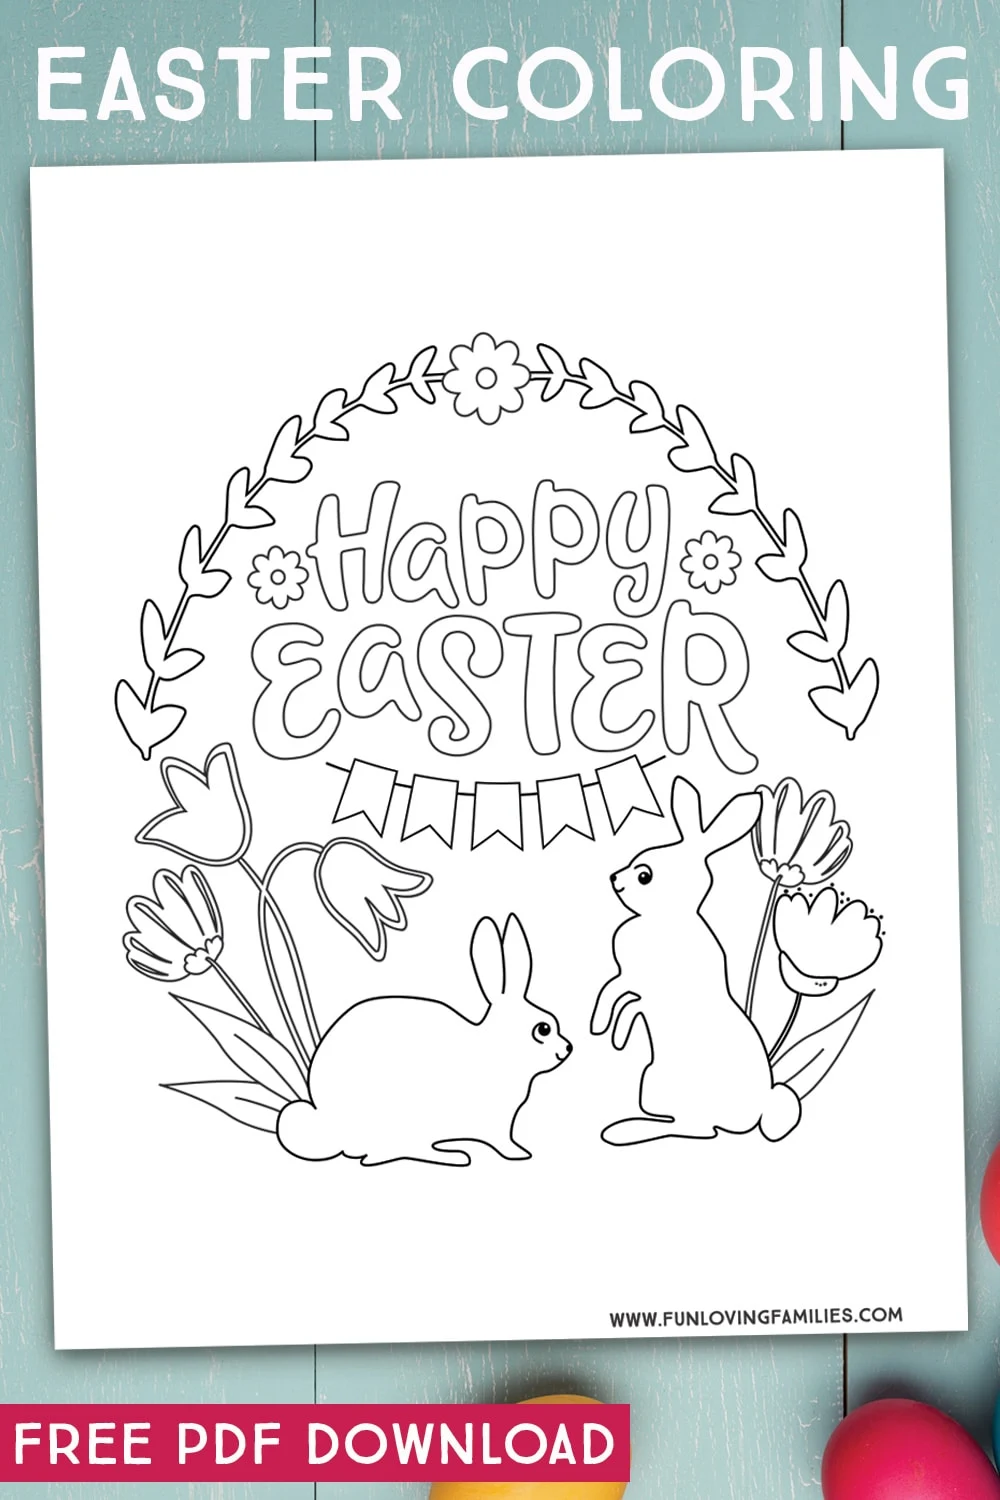 Super-cute Easter coloring page for kids or adults. Click through to see all of the fun Easter coloring sheets.